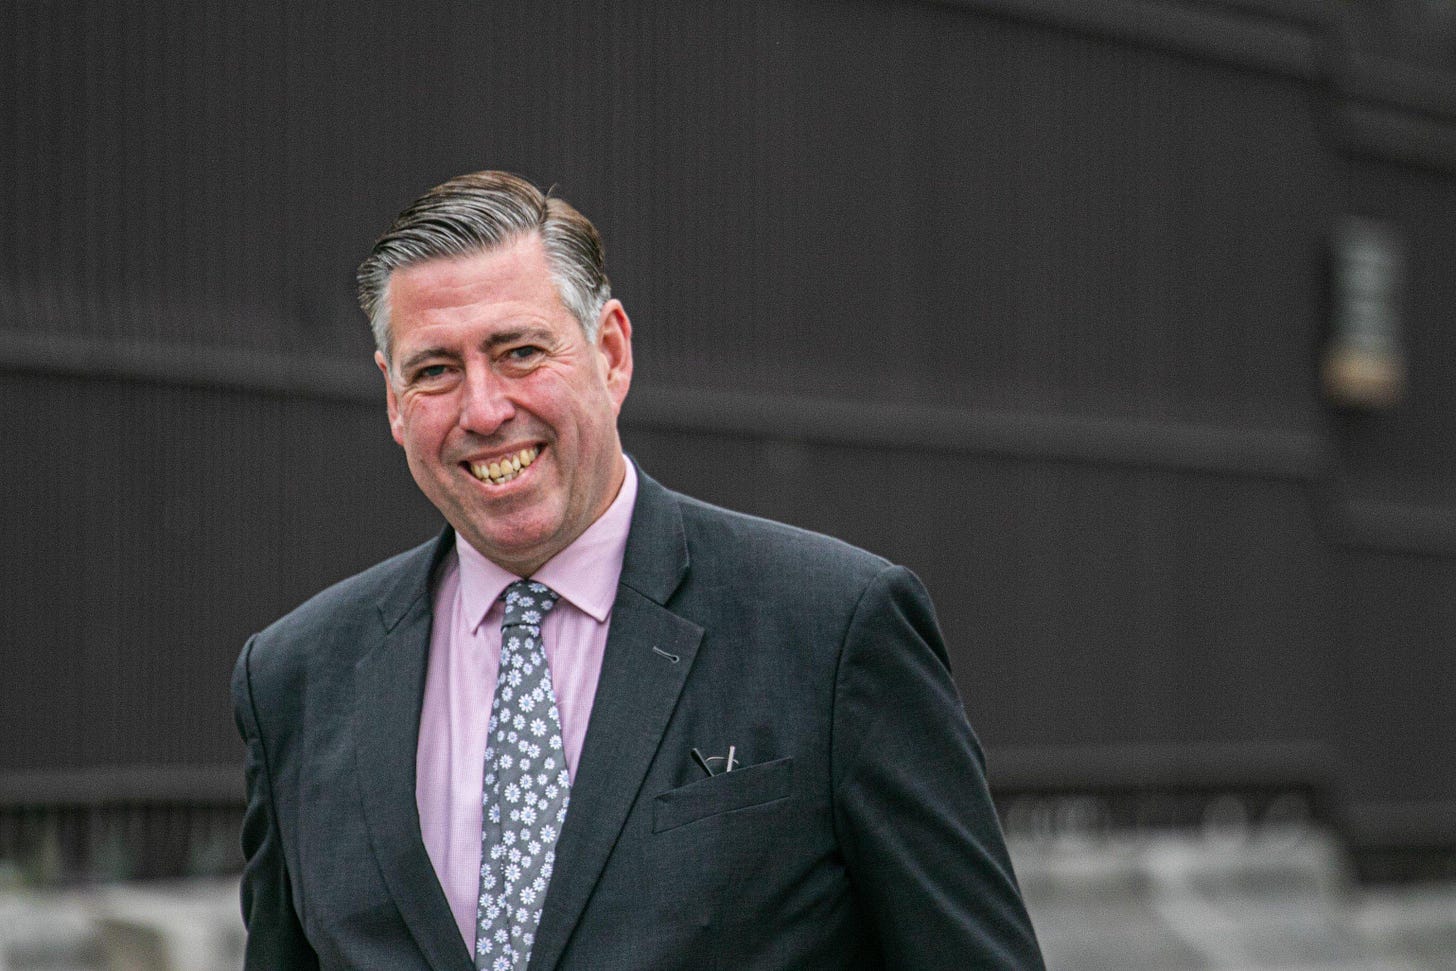 Sir Graham Brady re-elected as chairman of 1922 Committee | News | The Times